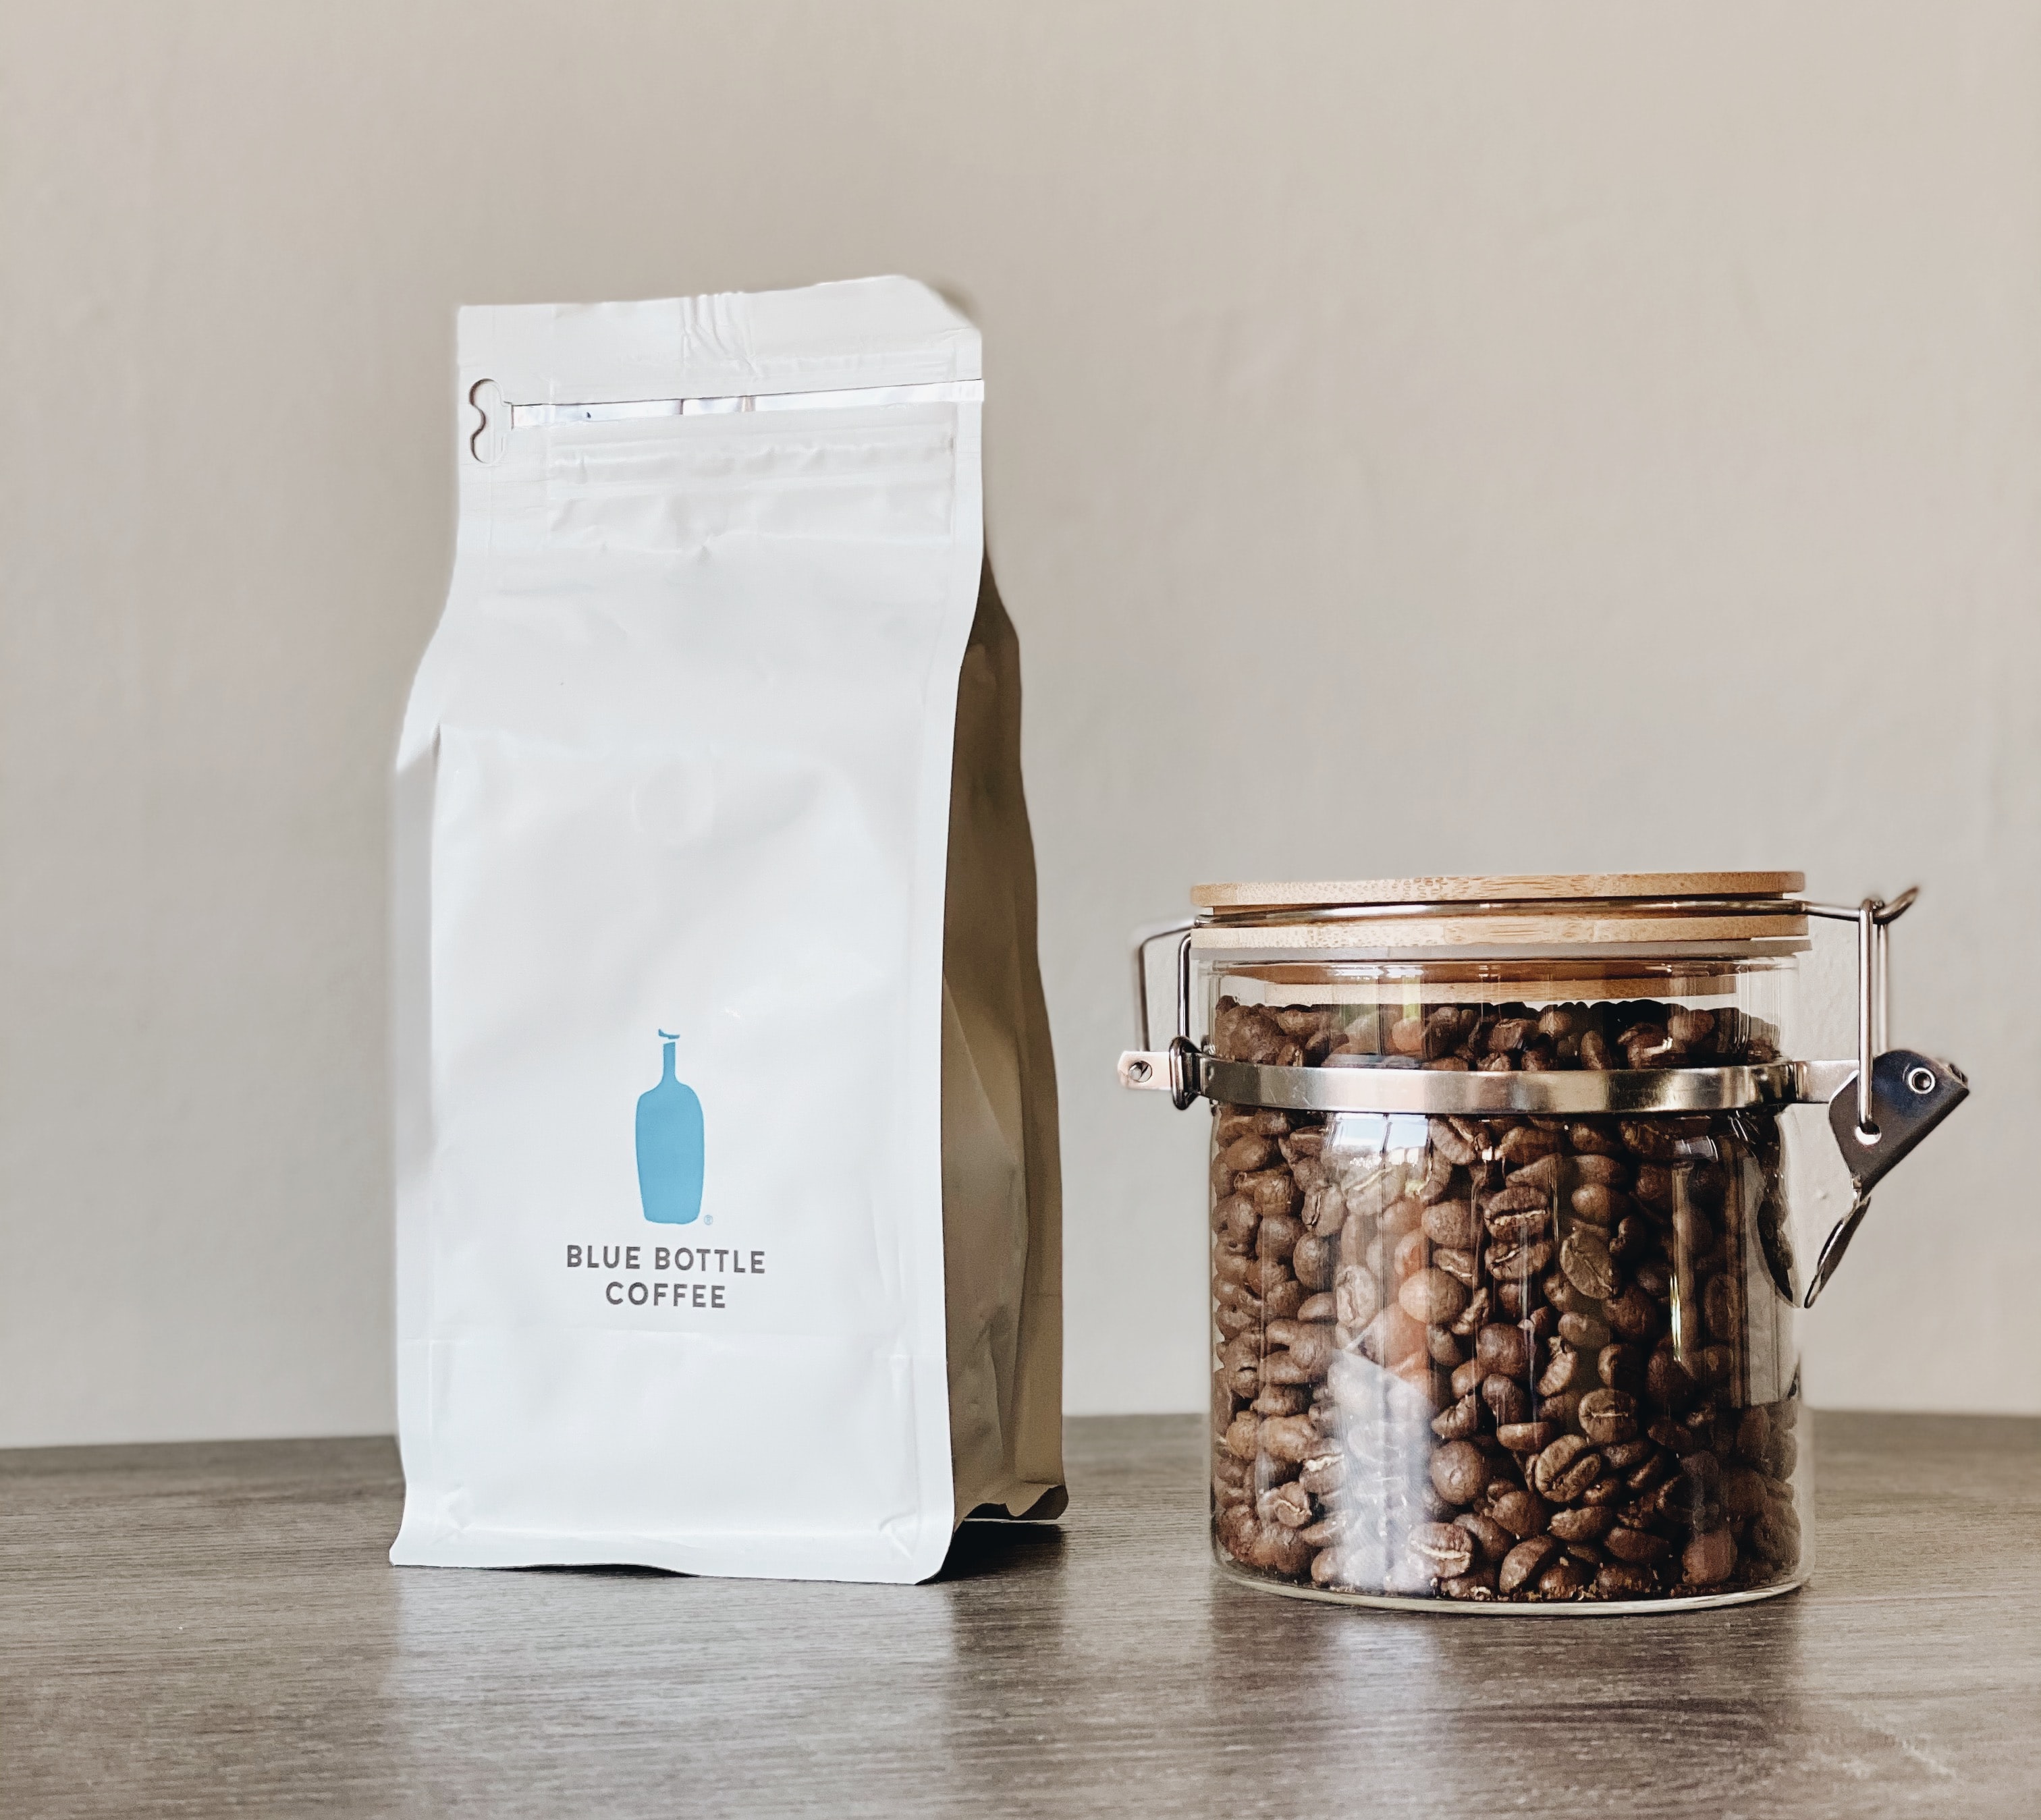 A bag of blue bottle coffee beans